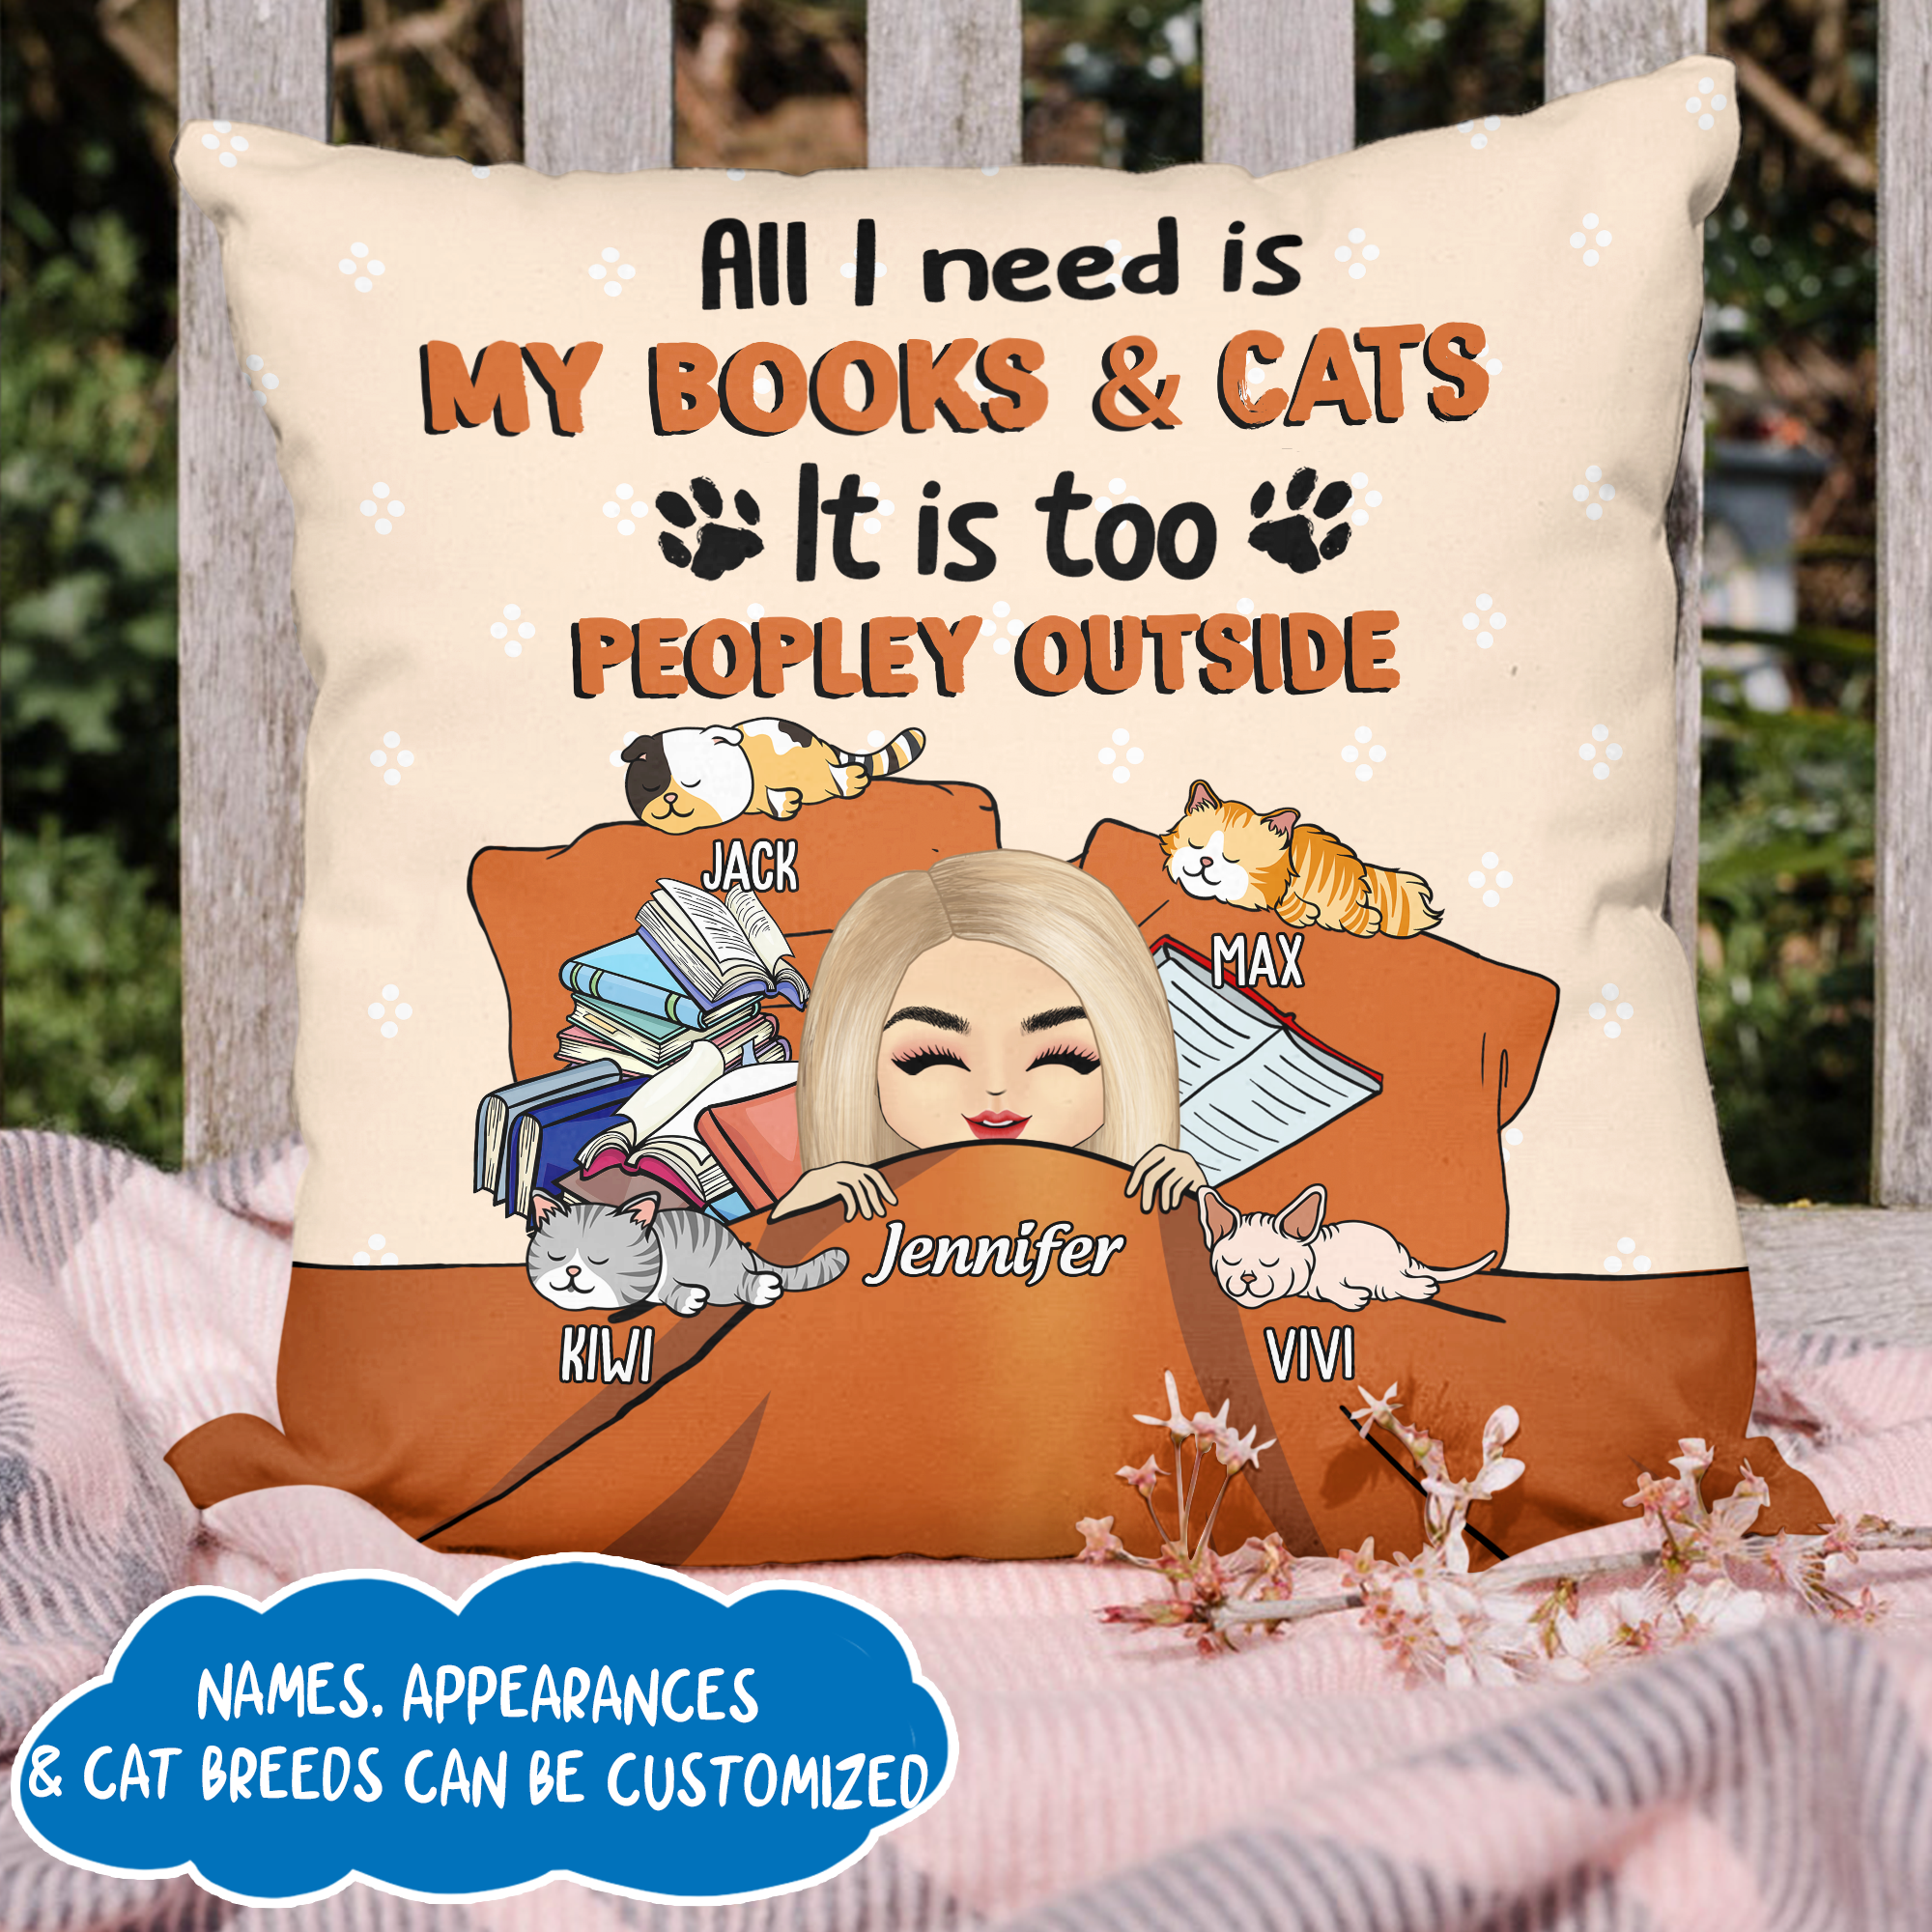 Personalized Pillow Case - Gift For Book & Cat Lovers - All I Need Is My Books & Cats